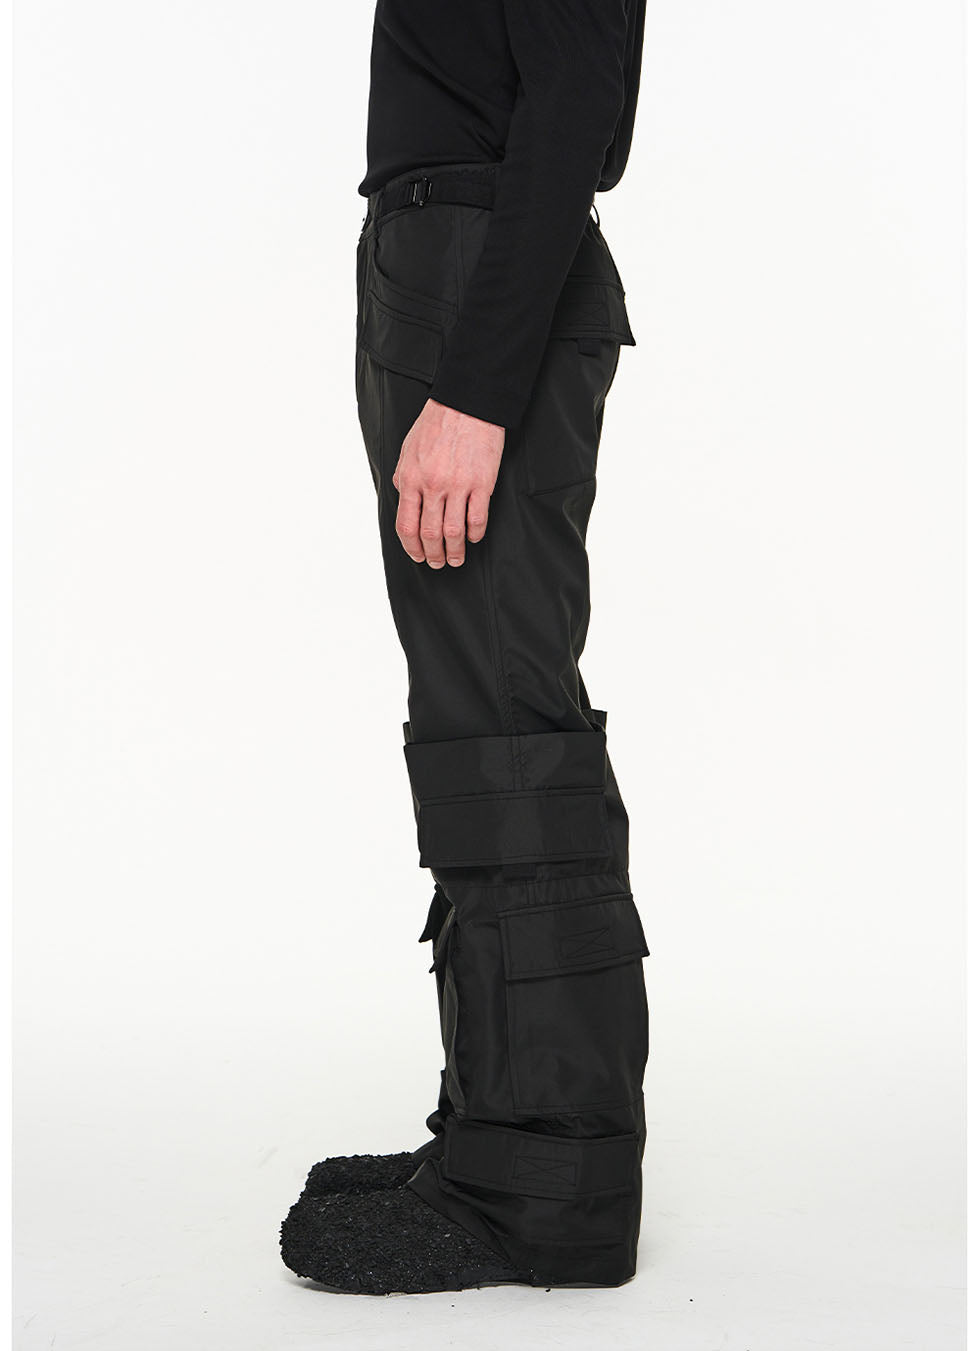 Boot-style layered pocket design pants